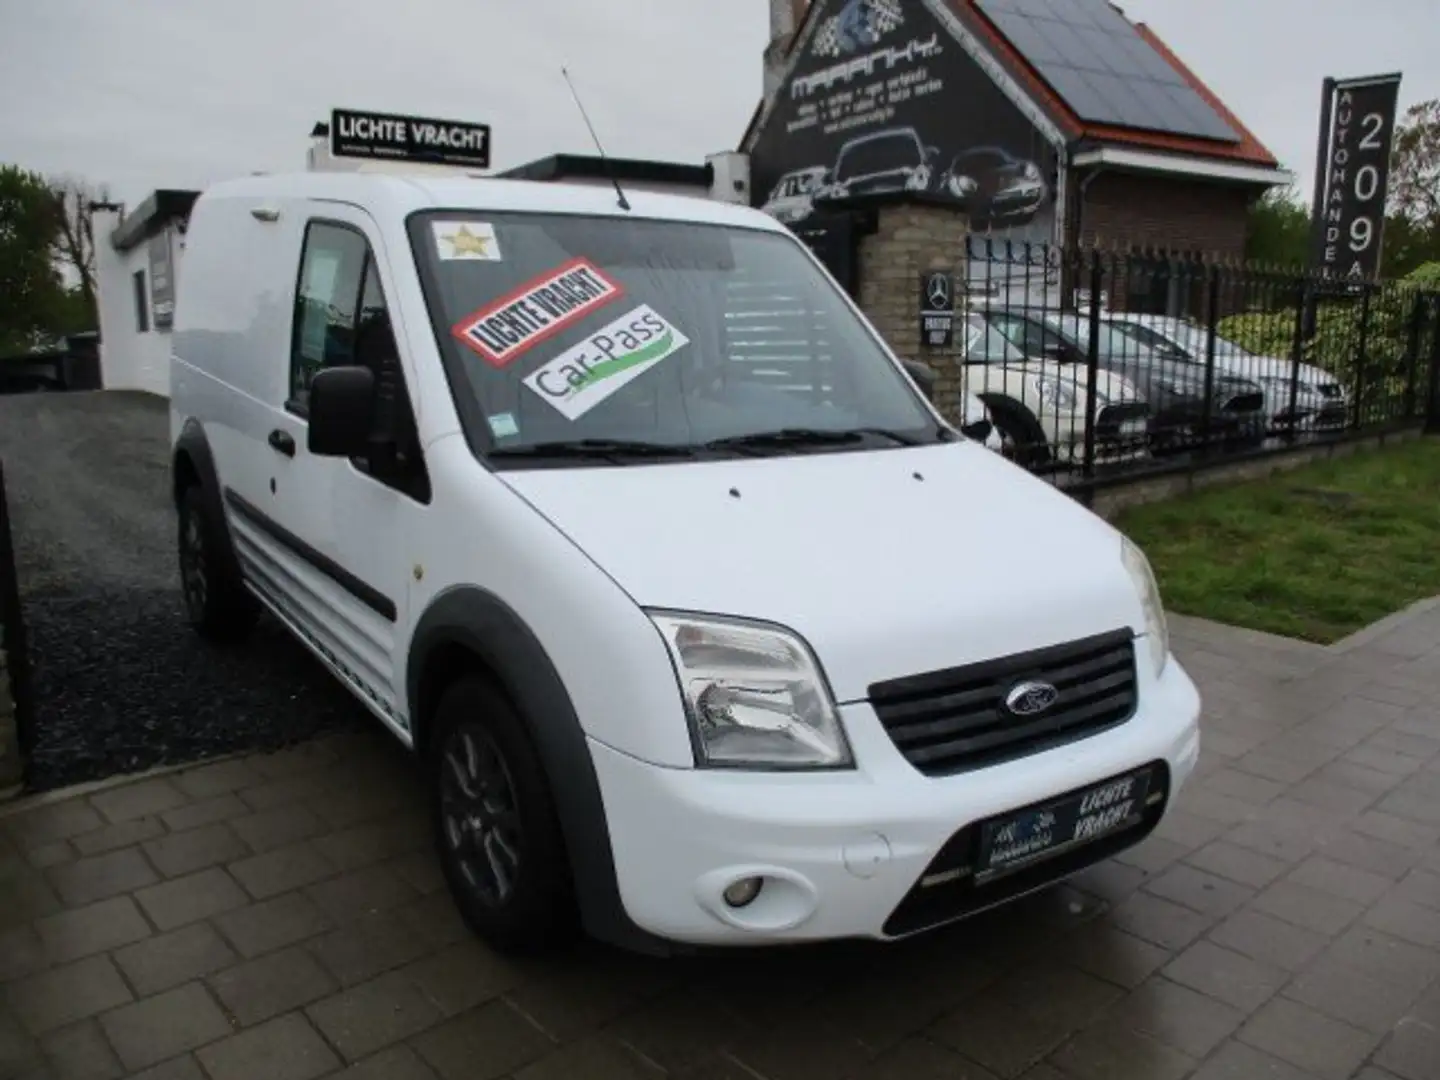 Ford Transit Connect 1.8TDCI AMBIENTE LICHTE VRACHT 2PL AIRCO PDC ALU Blanco - 1